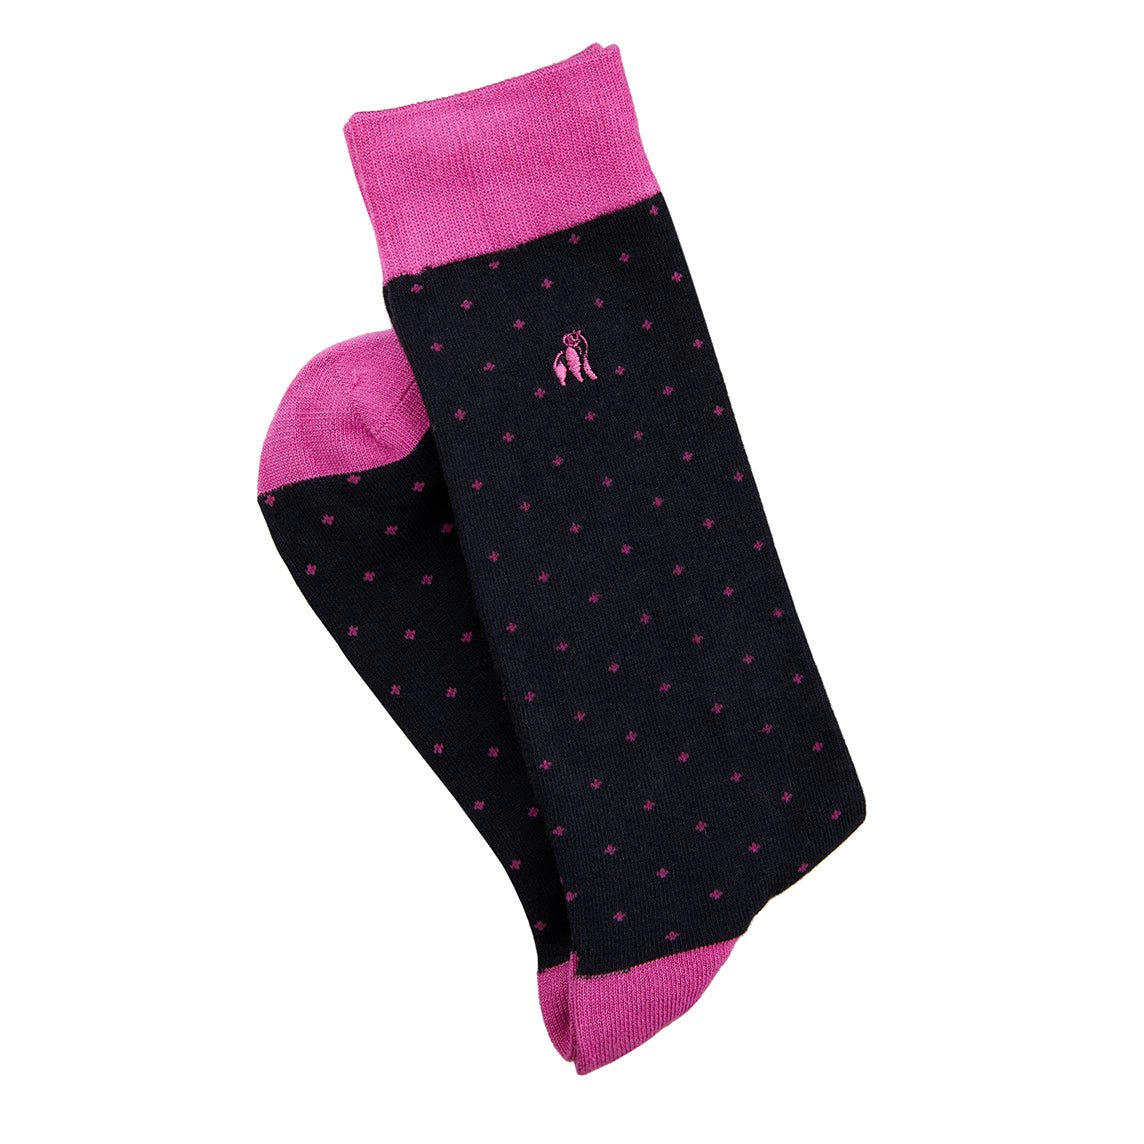 Bamboo Socks - Spotted Pink - Life of Riley